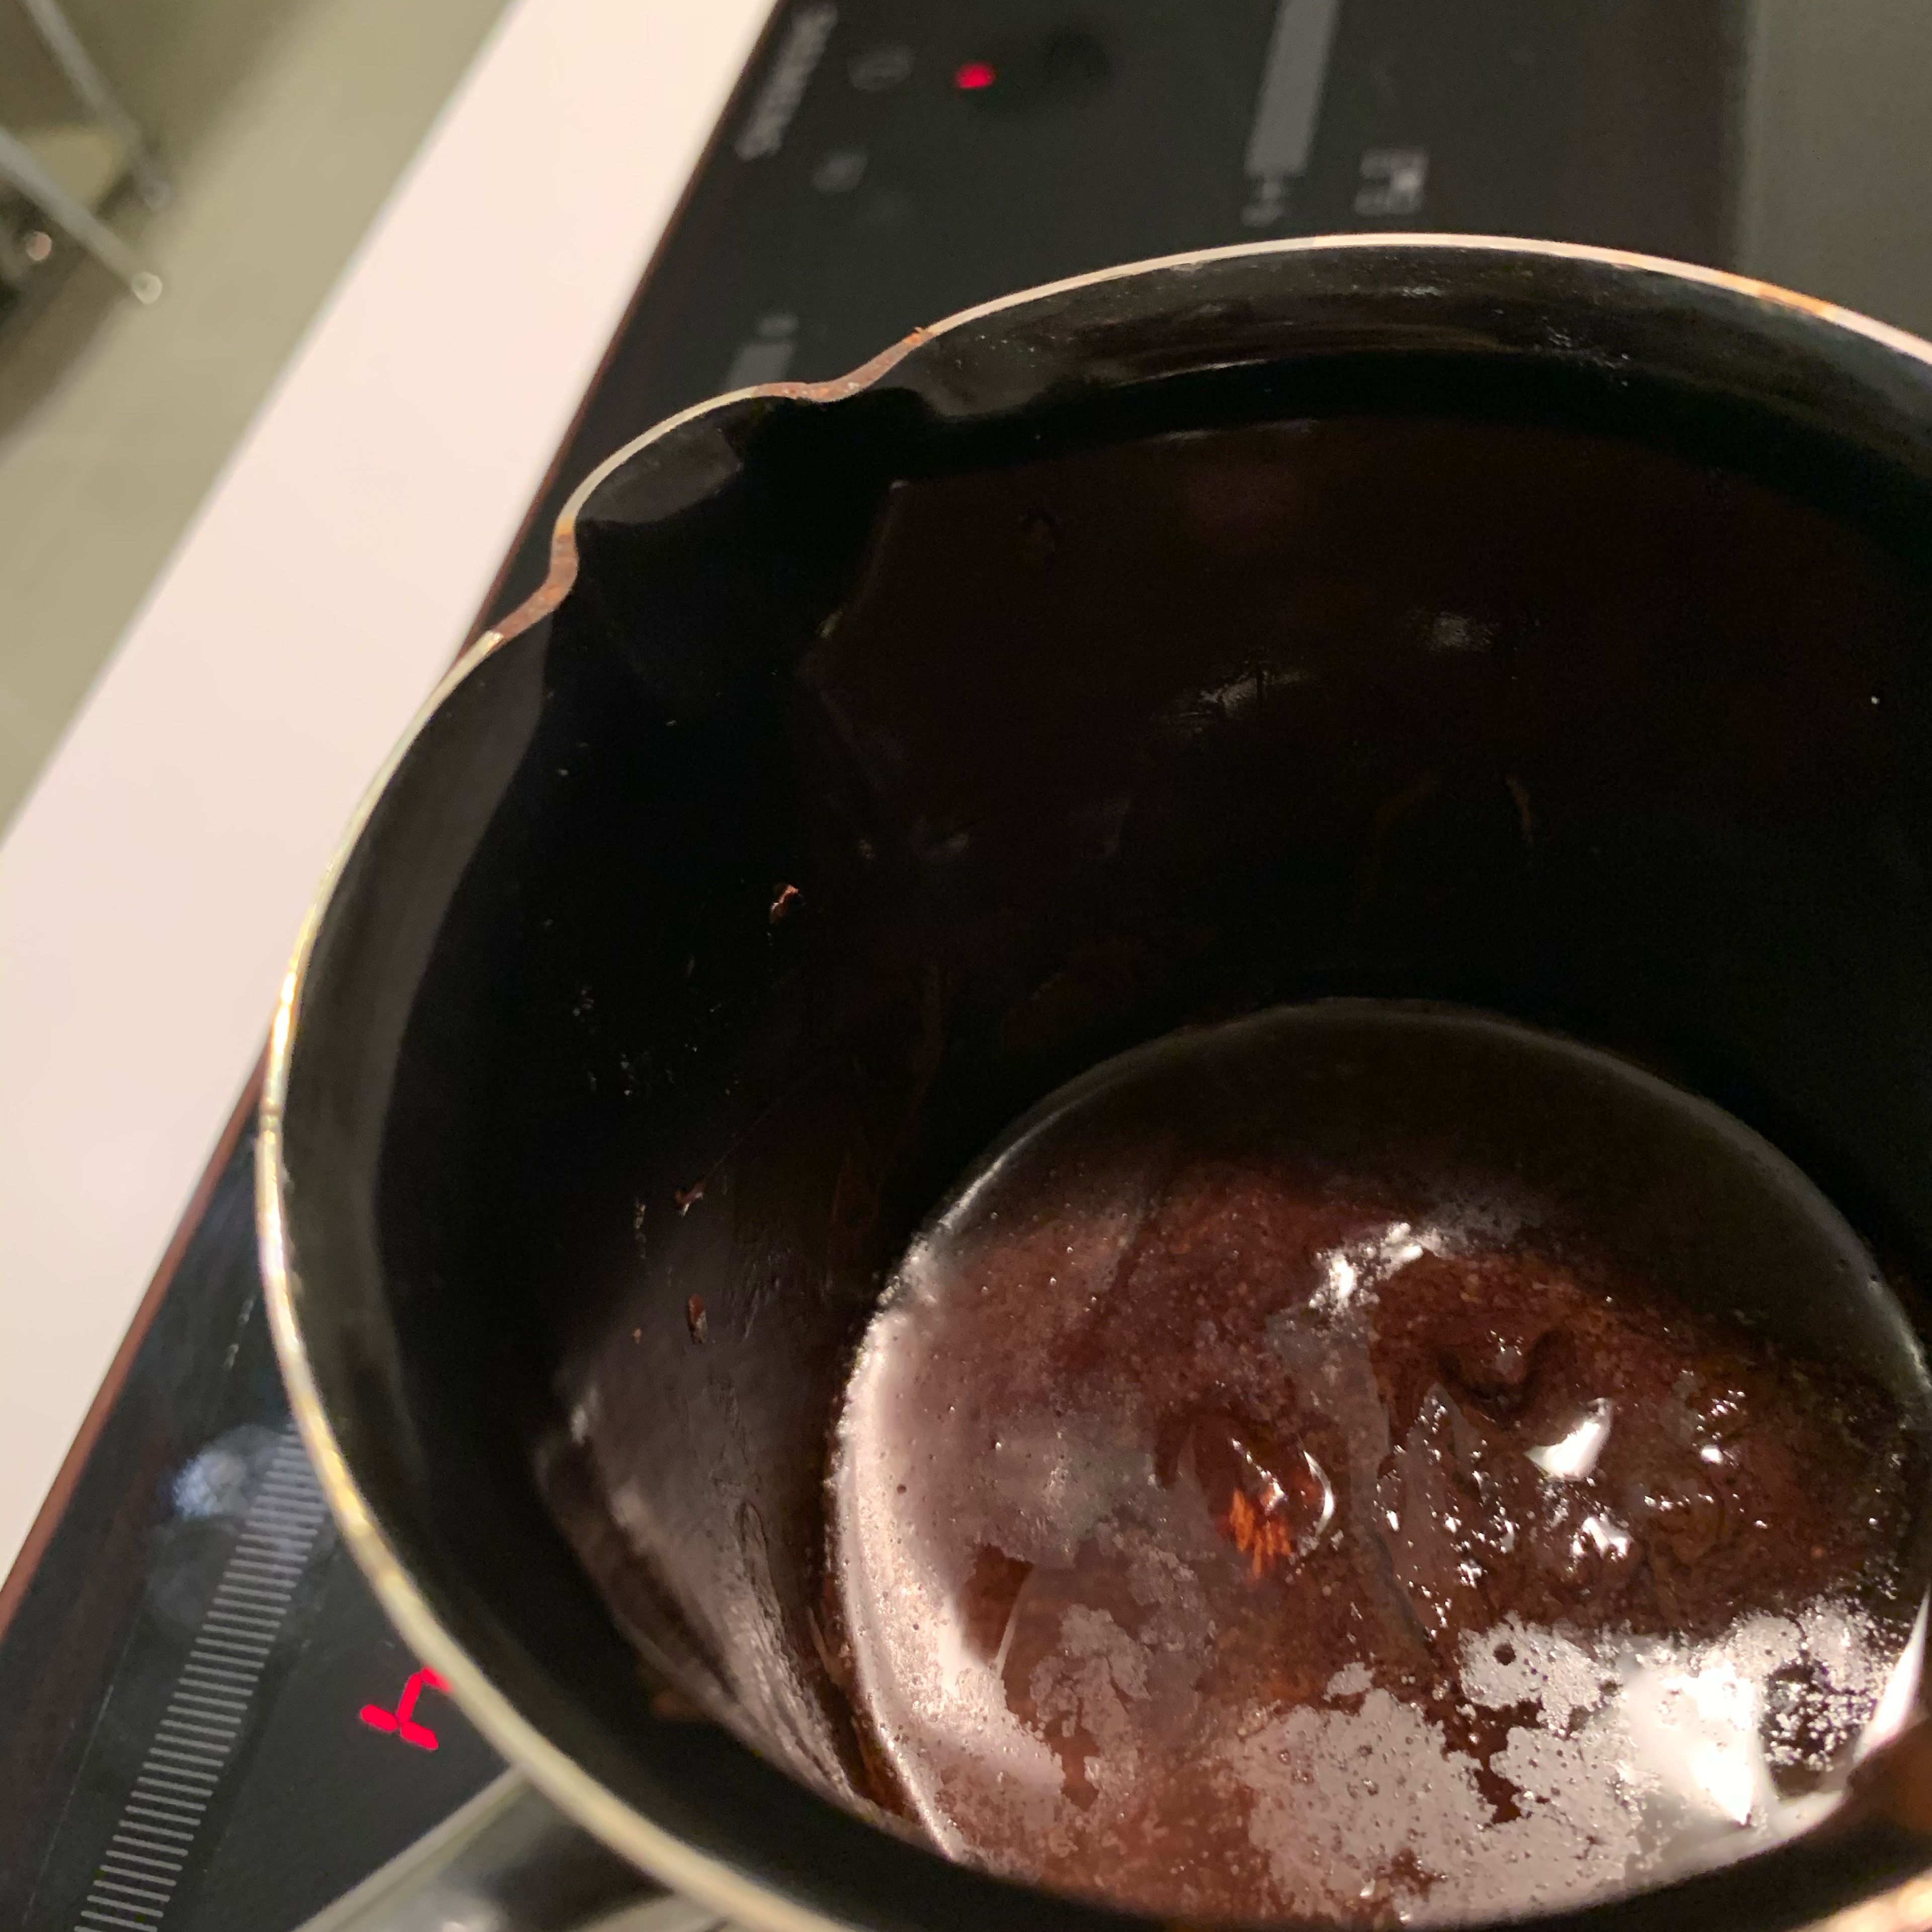 Put the chocolate and butter in a small pan and melt over low heat